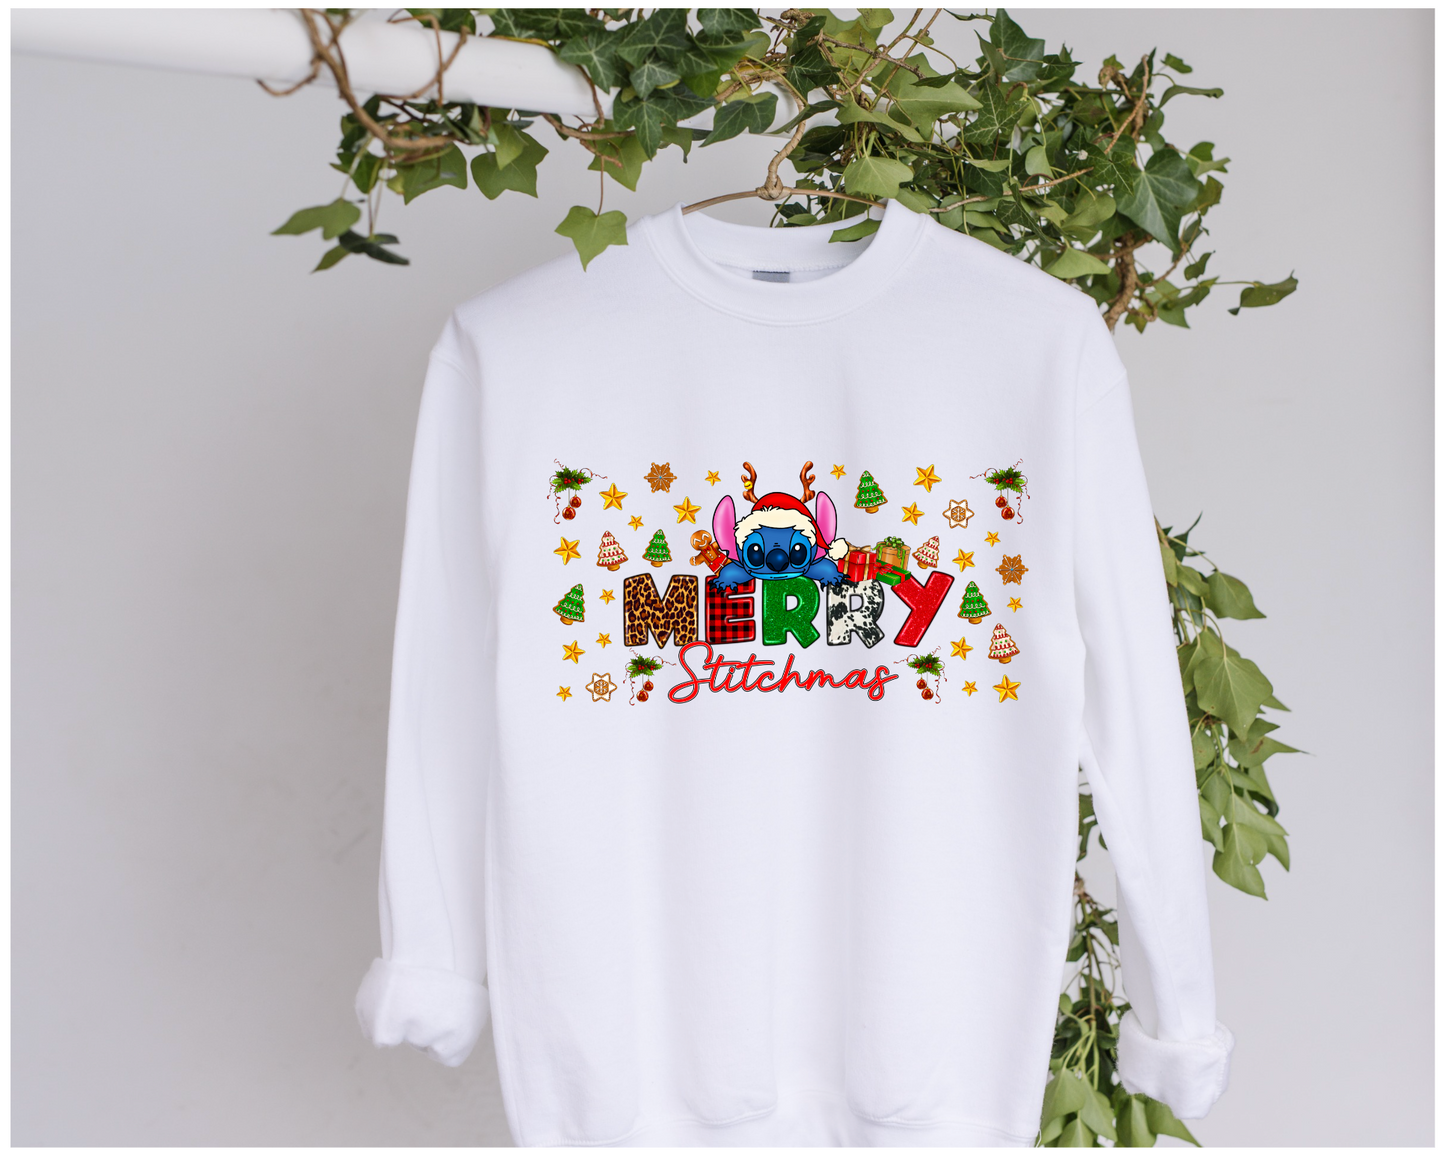 DTF Merry Stitchmas Clothing Designs